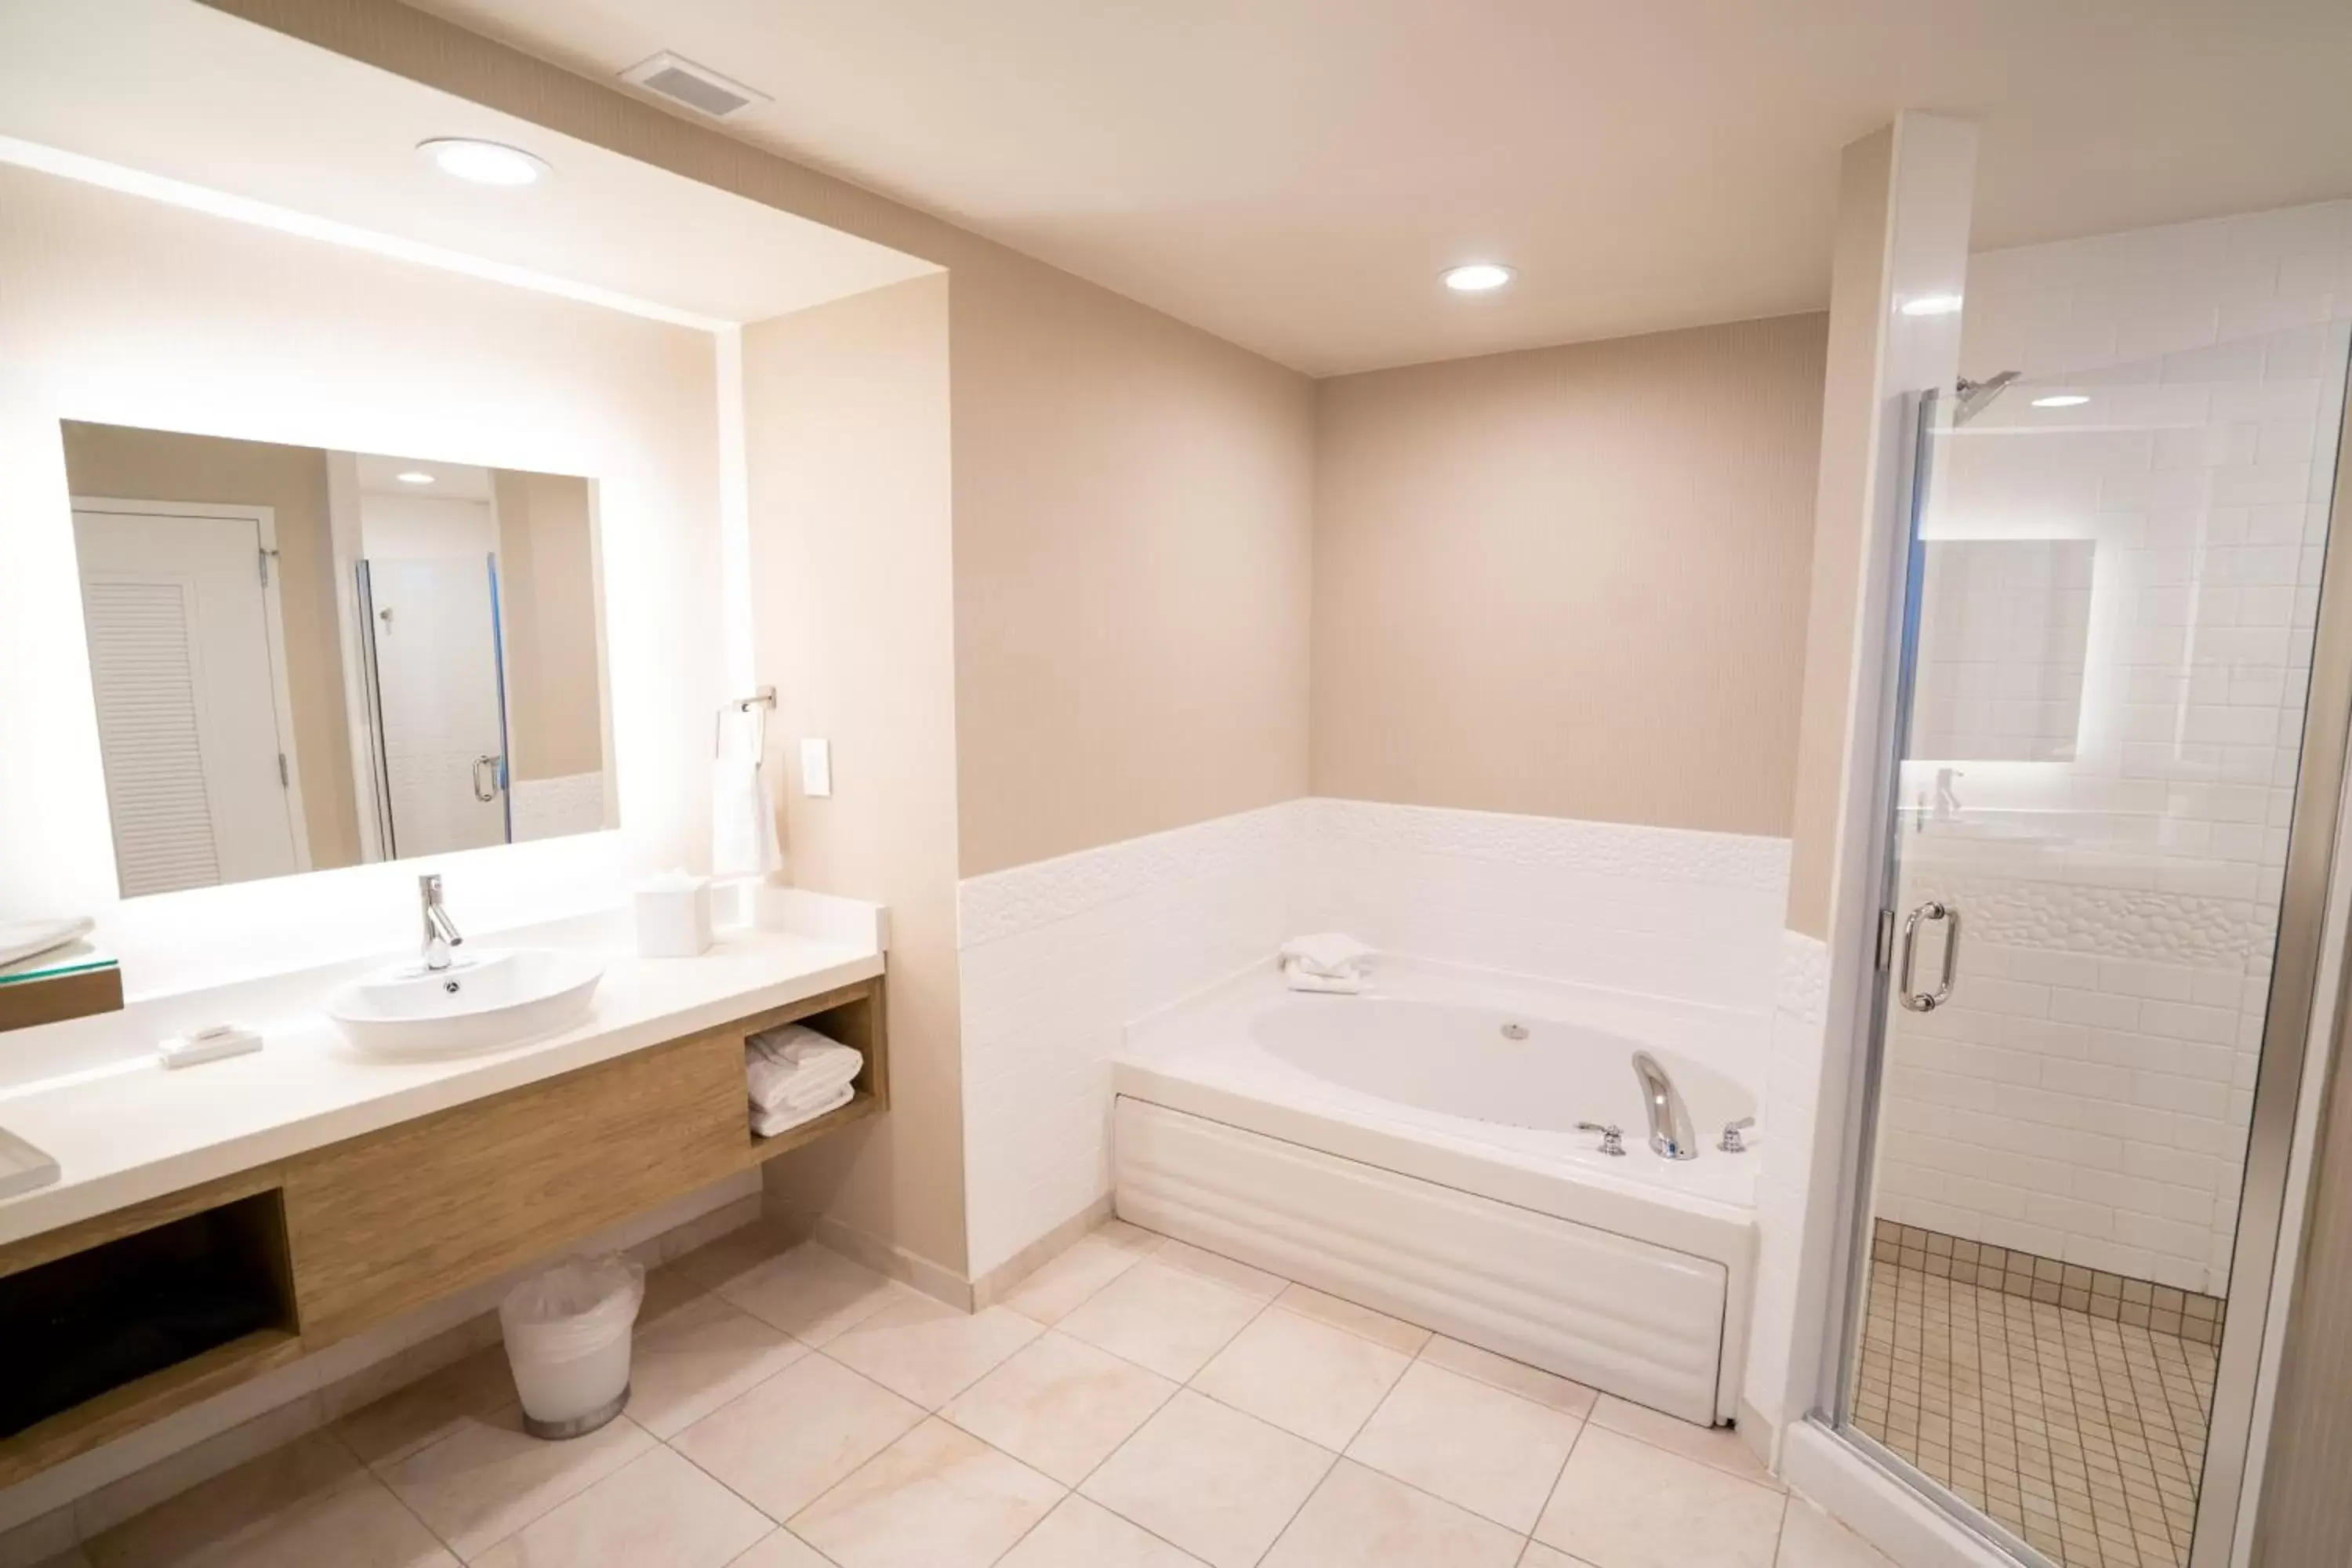 Bathroom in Delta Hotels by Marriott Raleigh-Durham at Research Triangle Park